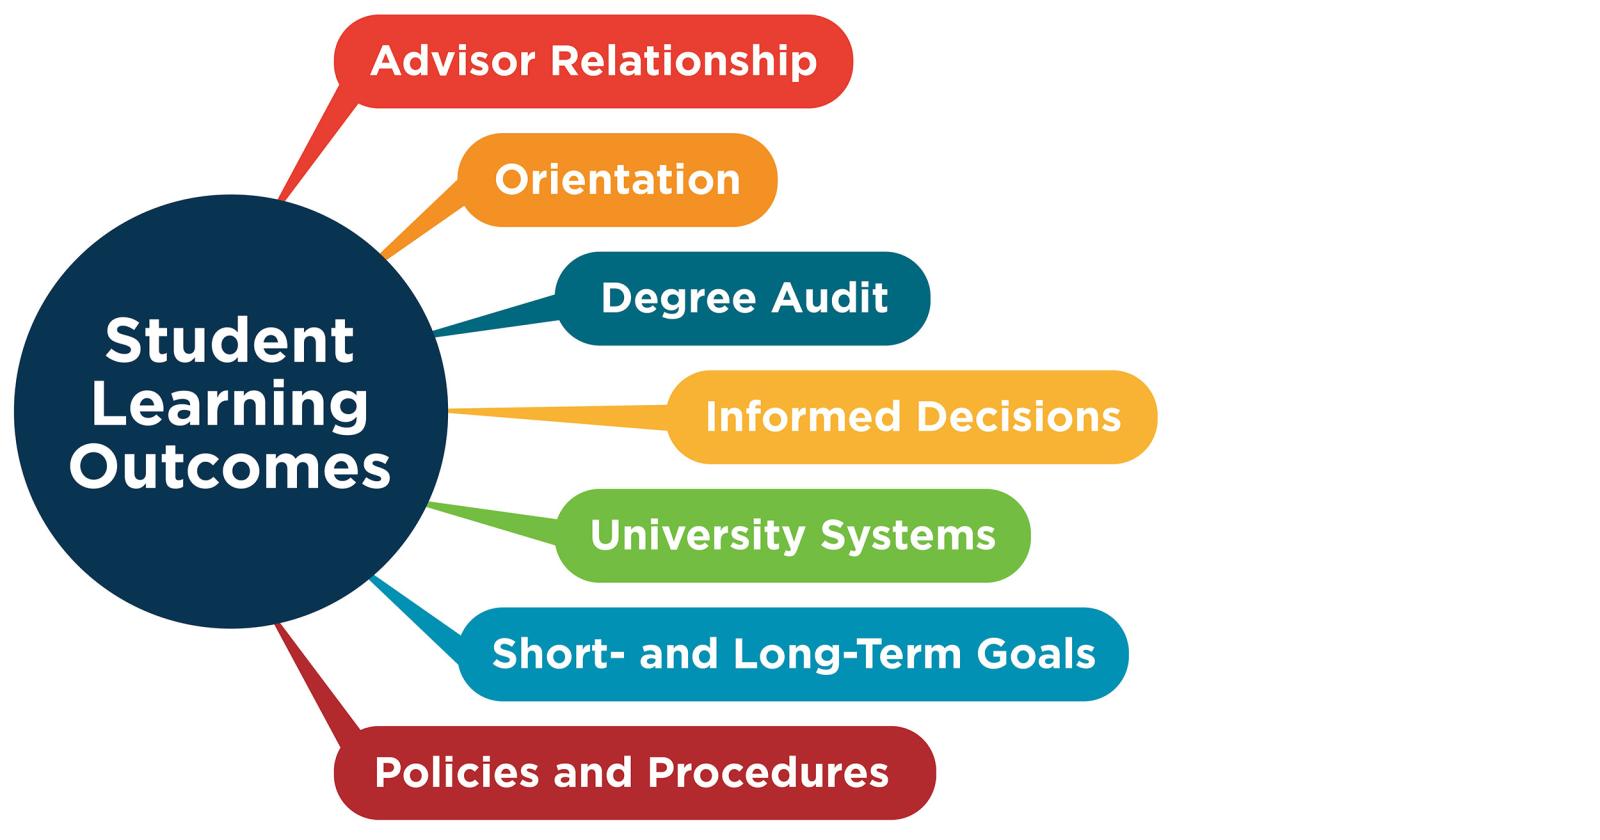 Bubble that says Student Learning Outcomes with connected speech bubbles that state Advisor Relationship, Orientation, Degree Audit, Informed Decisions, University Systems, Shoty- and Long- Term Goals, and Policies and Procedures.